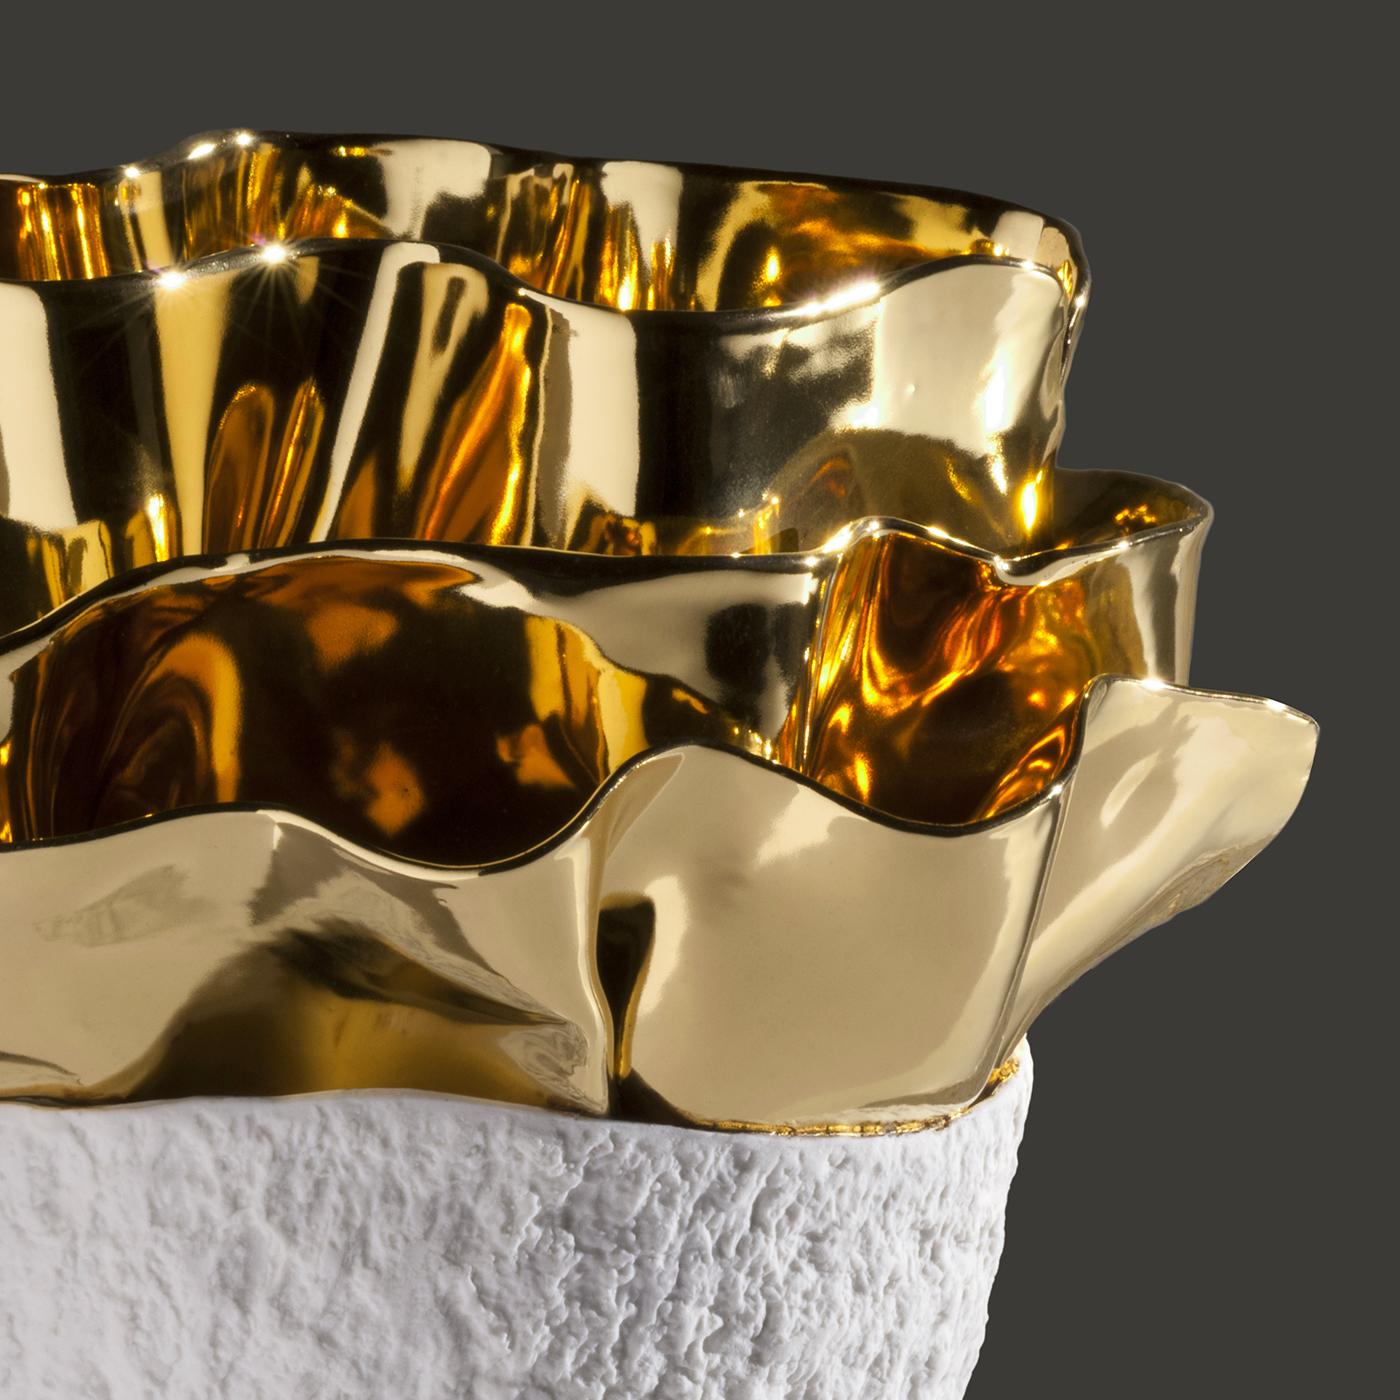 The particular elliptical shape and textured surface resembling hammering, are the result of a meticulous study on the microscopic magnification of a seed. This precious vase in glazed porcelain is decorated with gold 23-karat, applied by expert